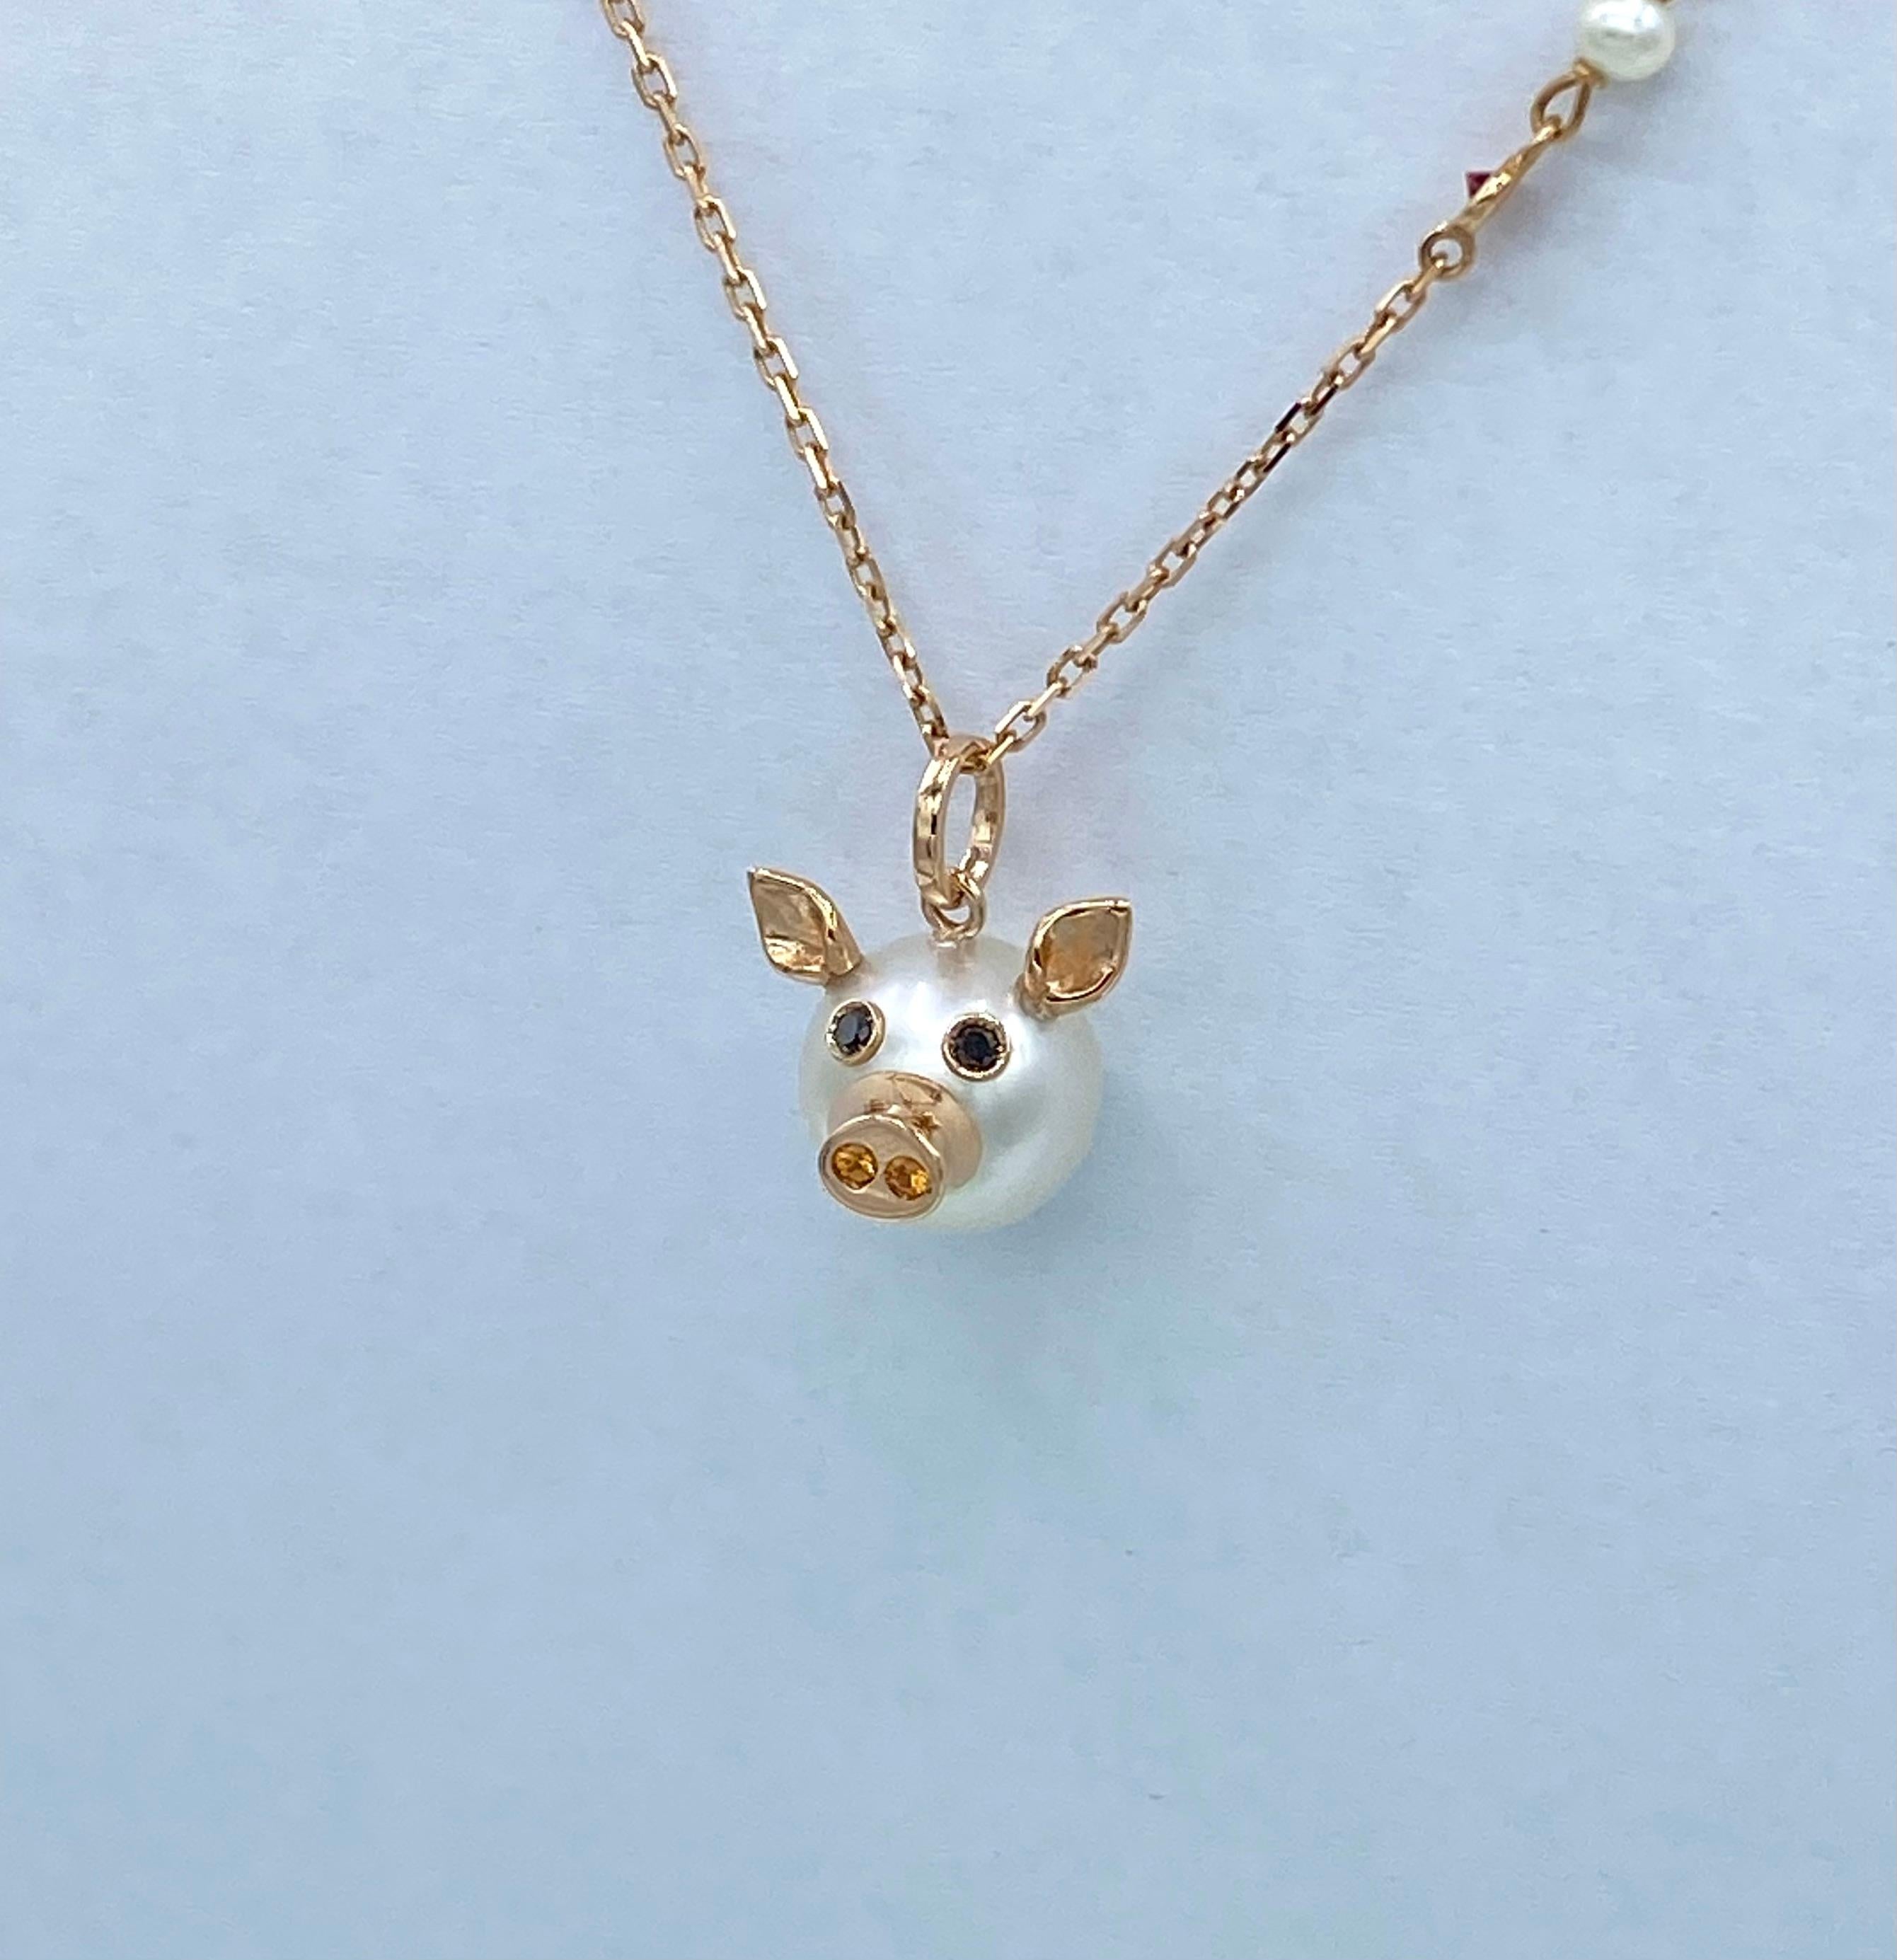 18KT rose gold piglet pendant with Australian pearl, diamonds and sapphires.
With an Australian pearl  button I made a piglet pendant; I added the nose, ears and eyes.
All gold elements are 18Kt rose gold. The eyes are set with two natural black